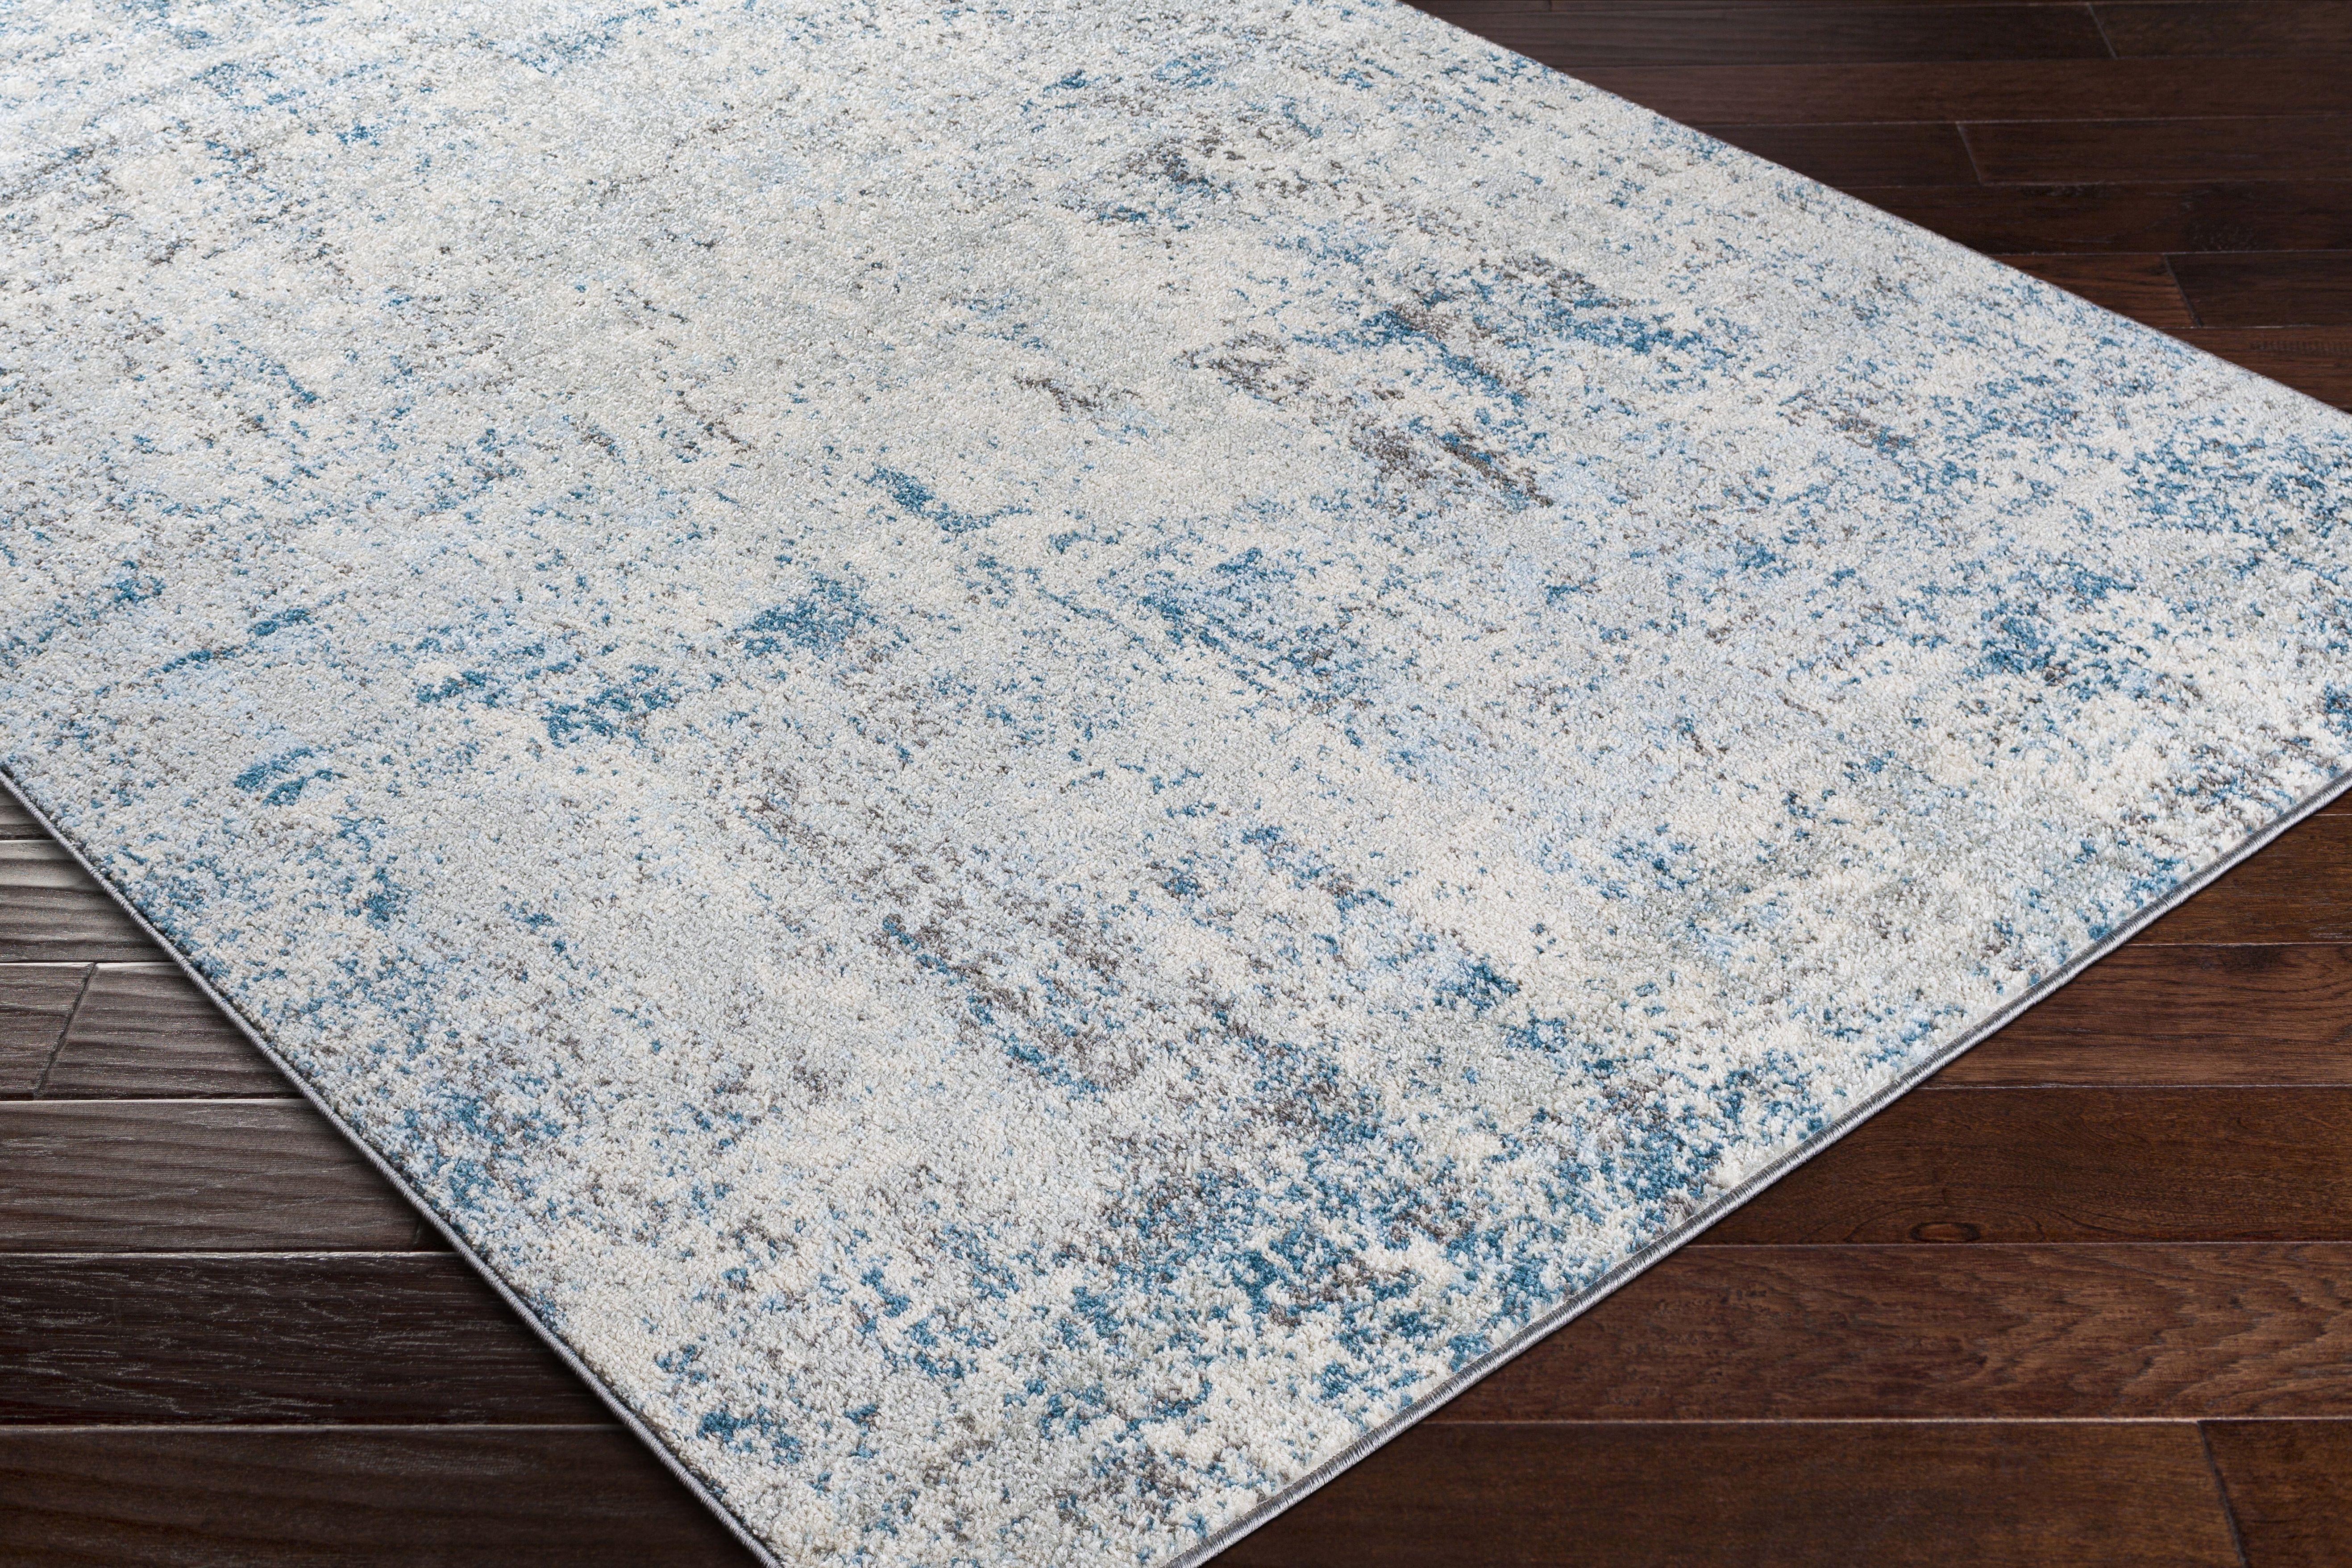 Chester Rug, 6'7" x 9' - Image 6